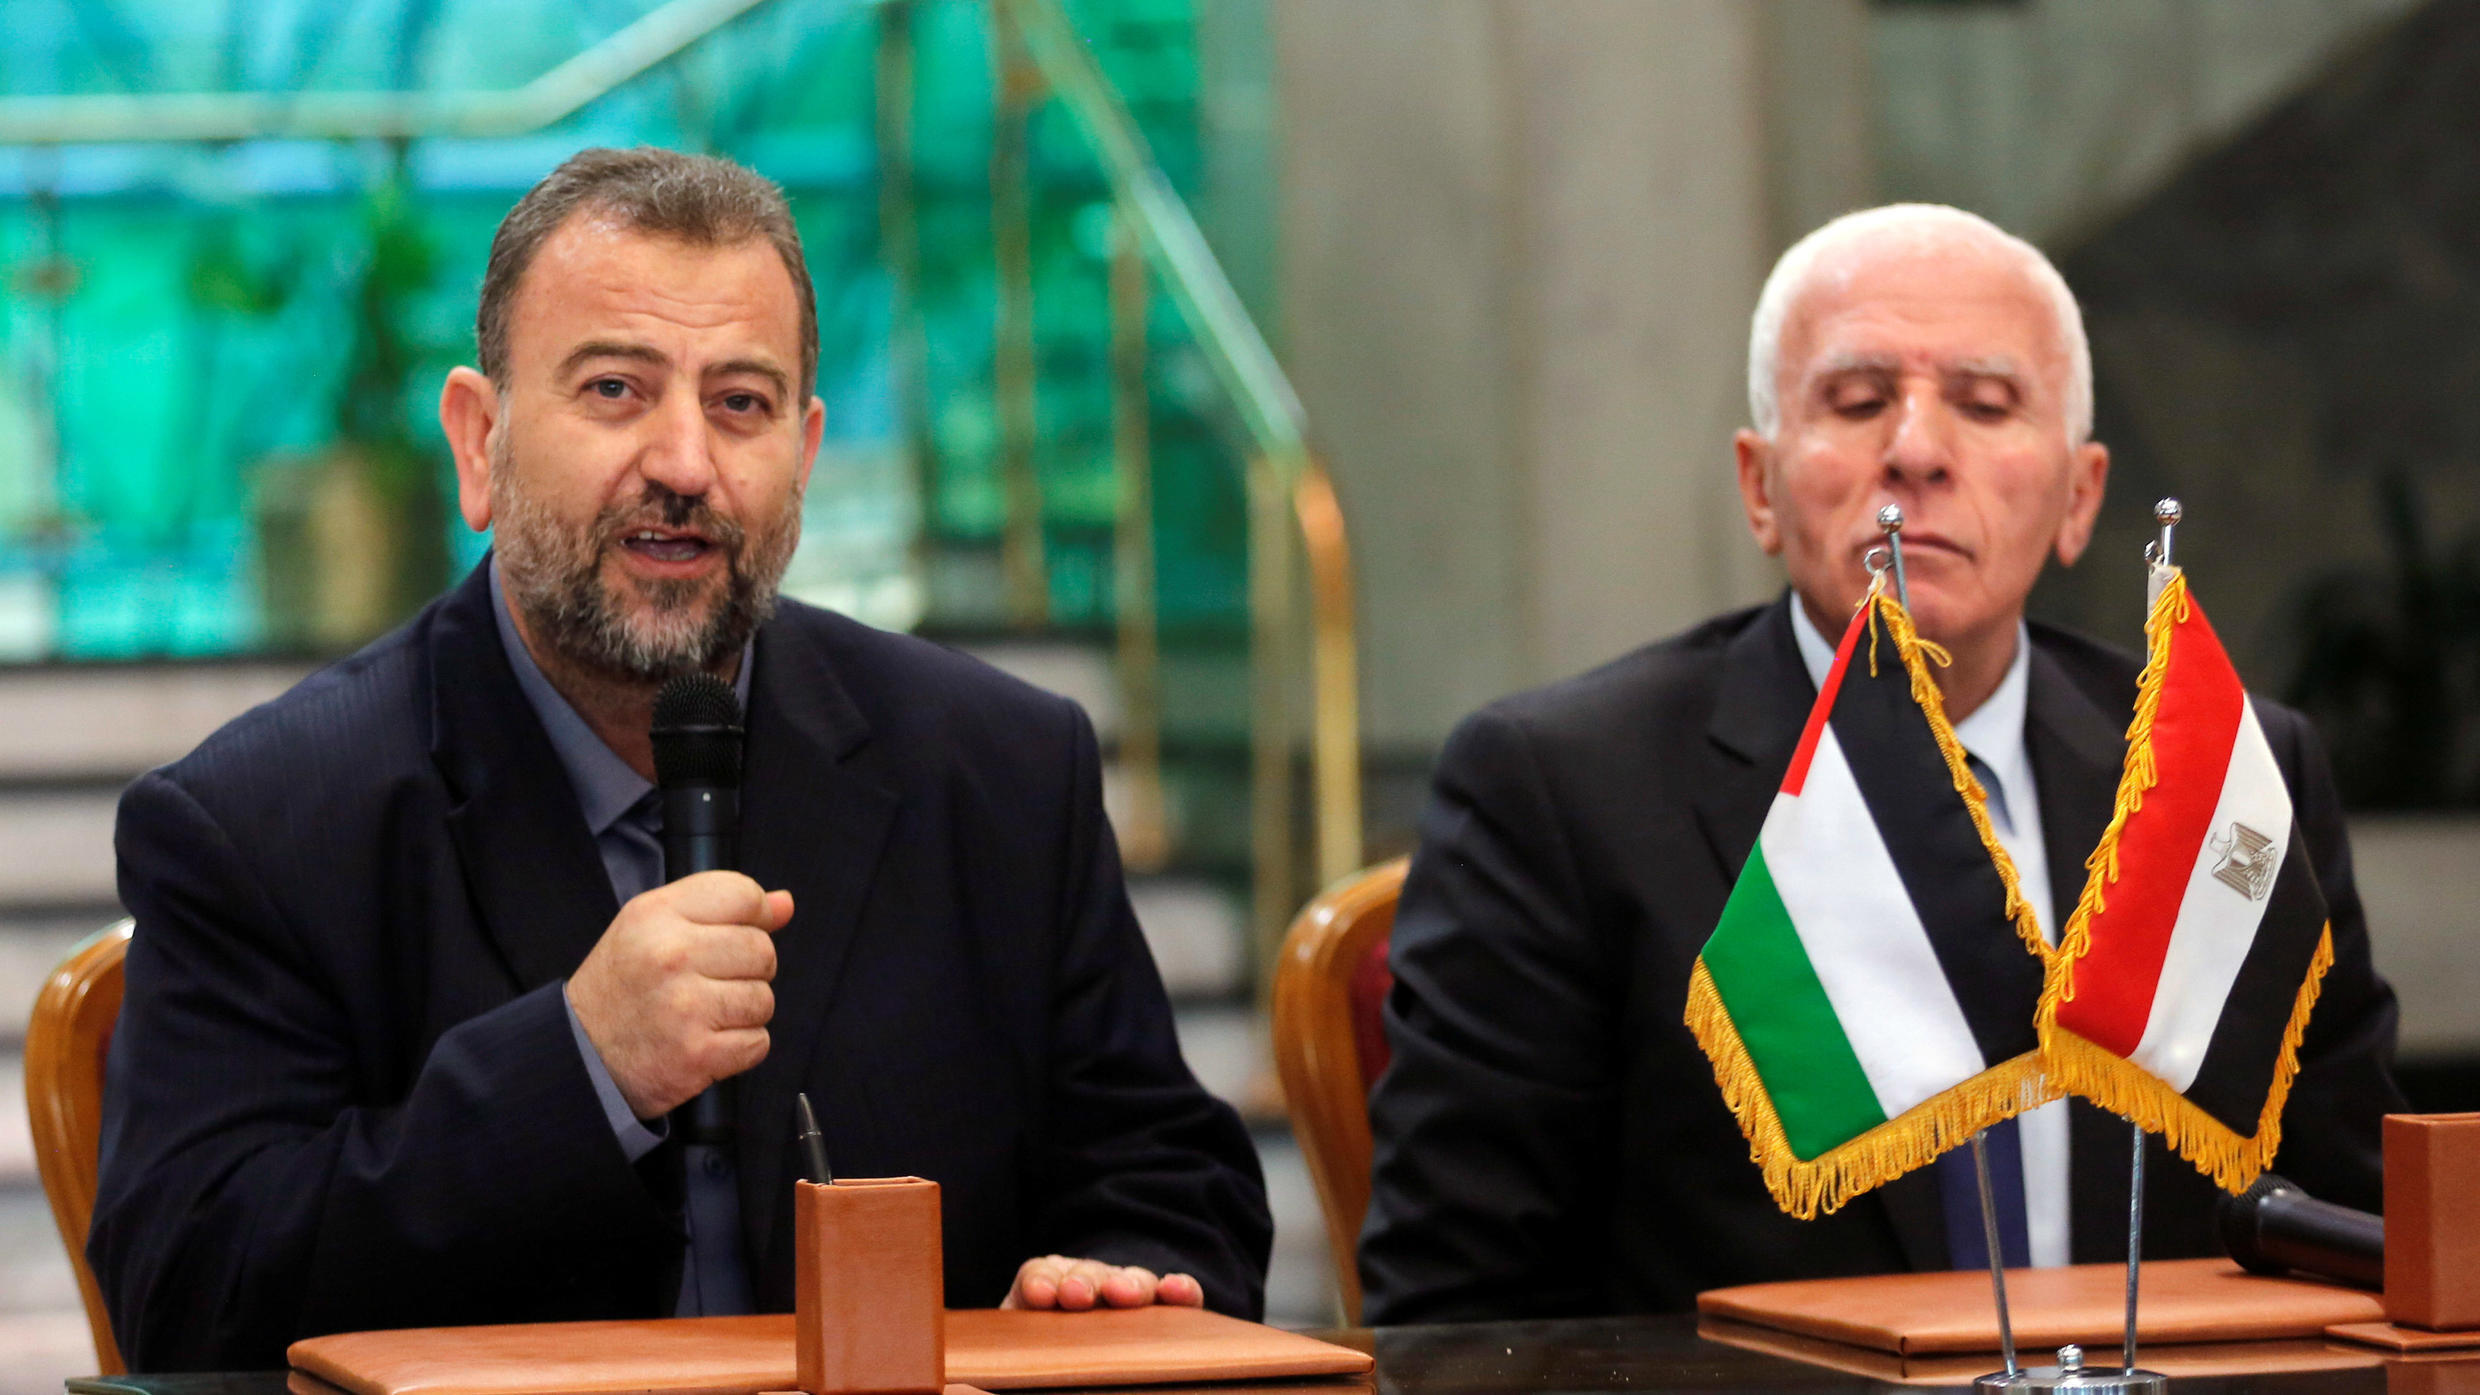 Saleh al-Arouri attends a press conference with Fatah leader Azzam Ahman in Cairo on October 2017.